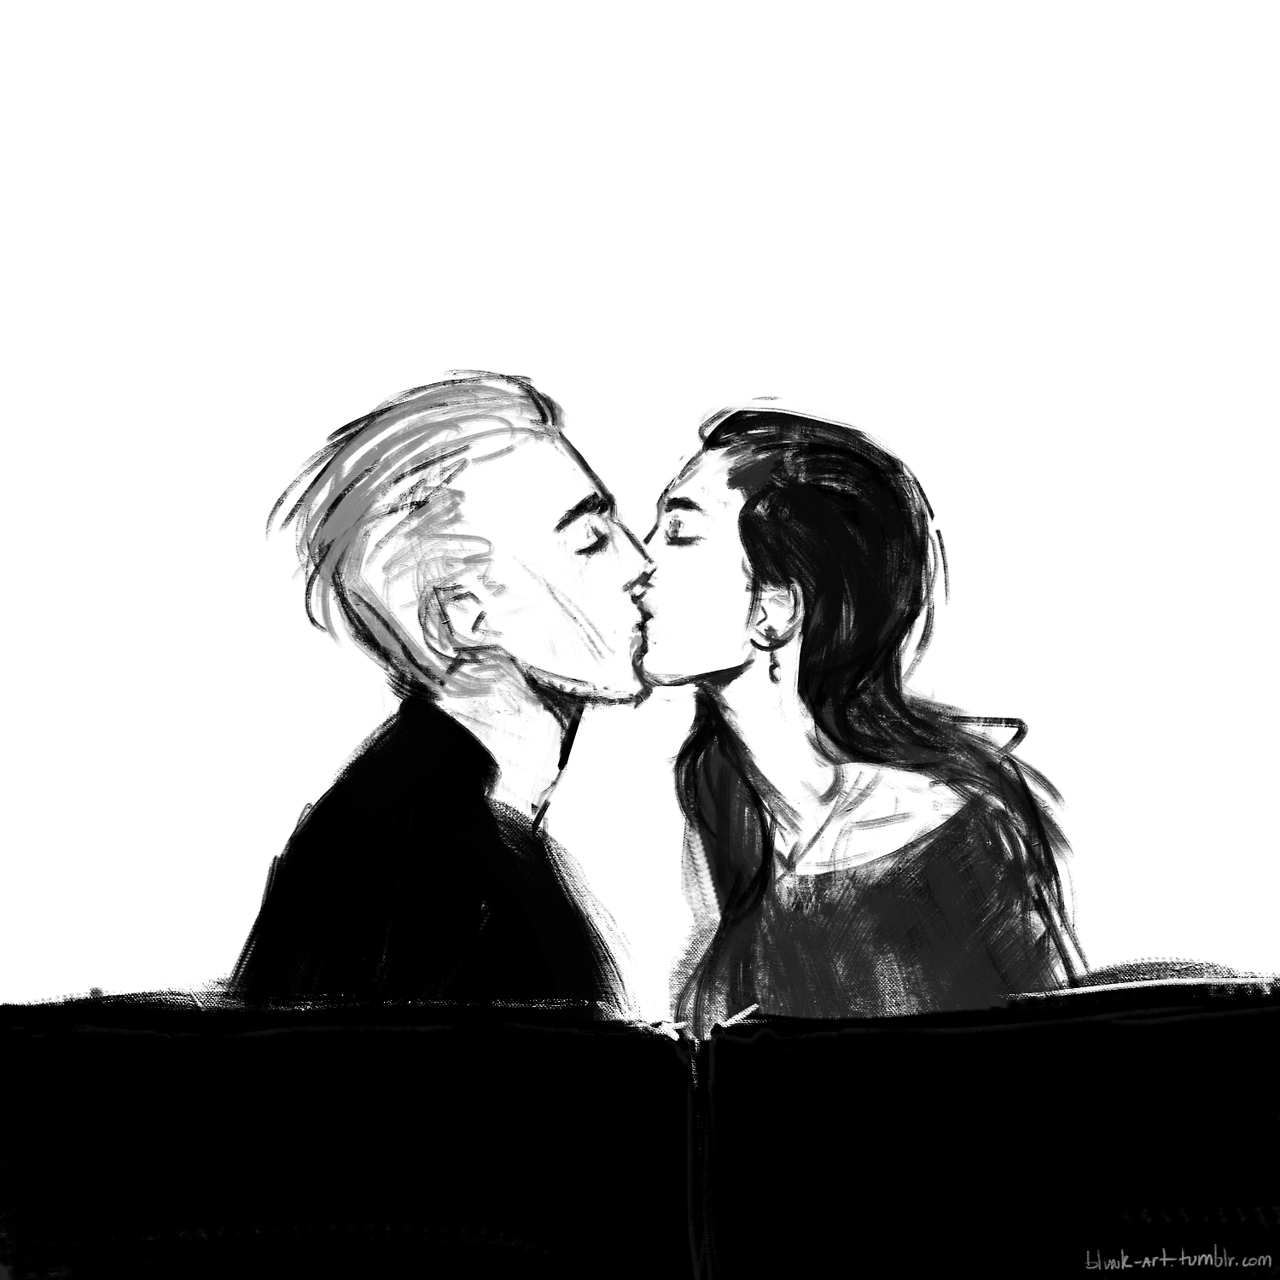 Draco and Astoria sharing their first kiss in the Mansion ...